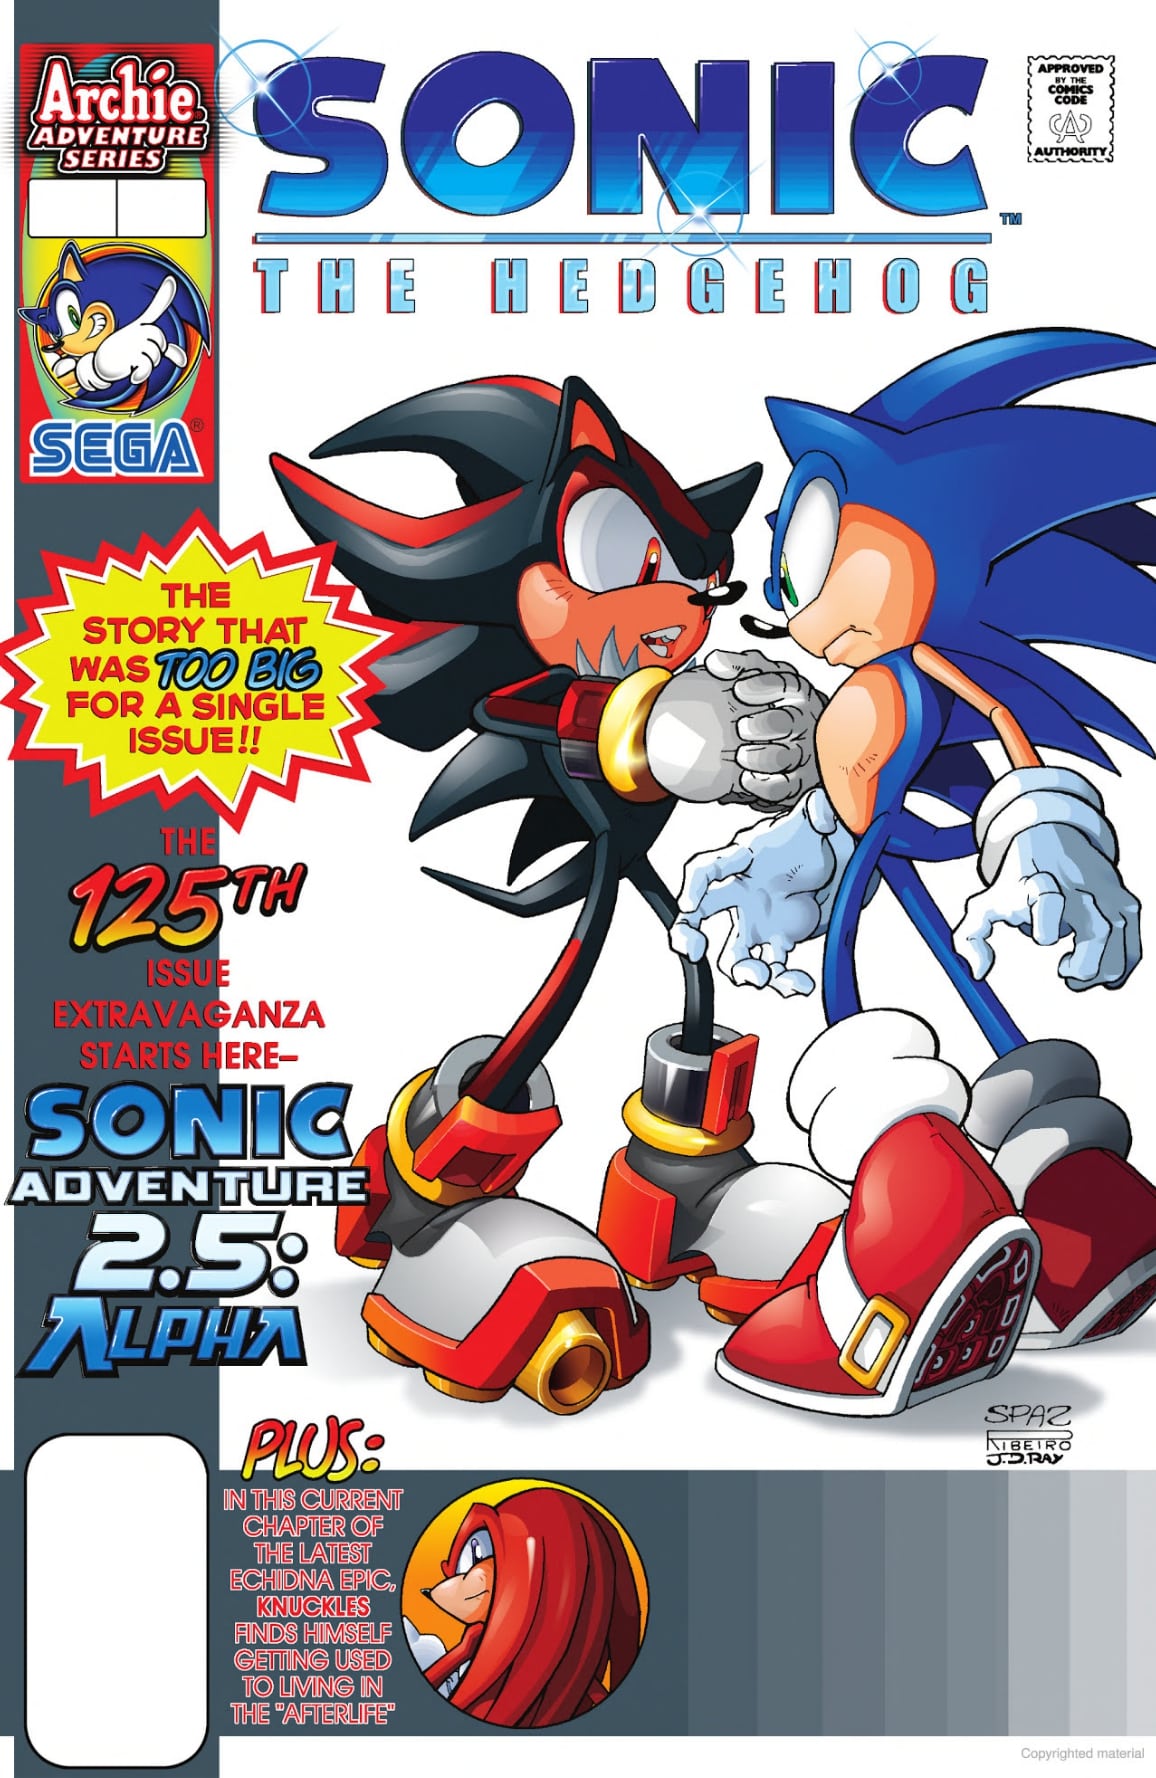 How Archie Comics Lost the Rights to Sonic the Hedgehog Characters